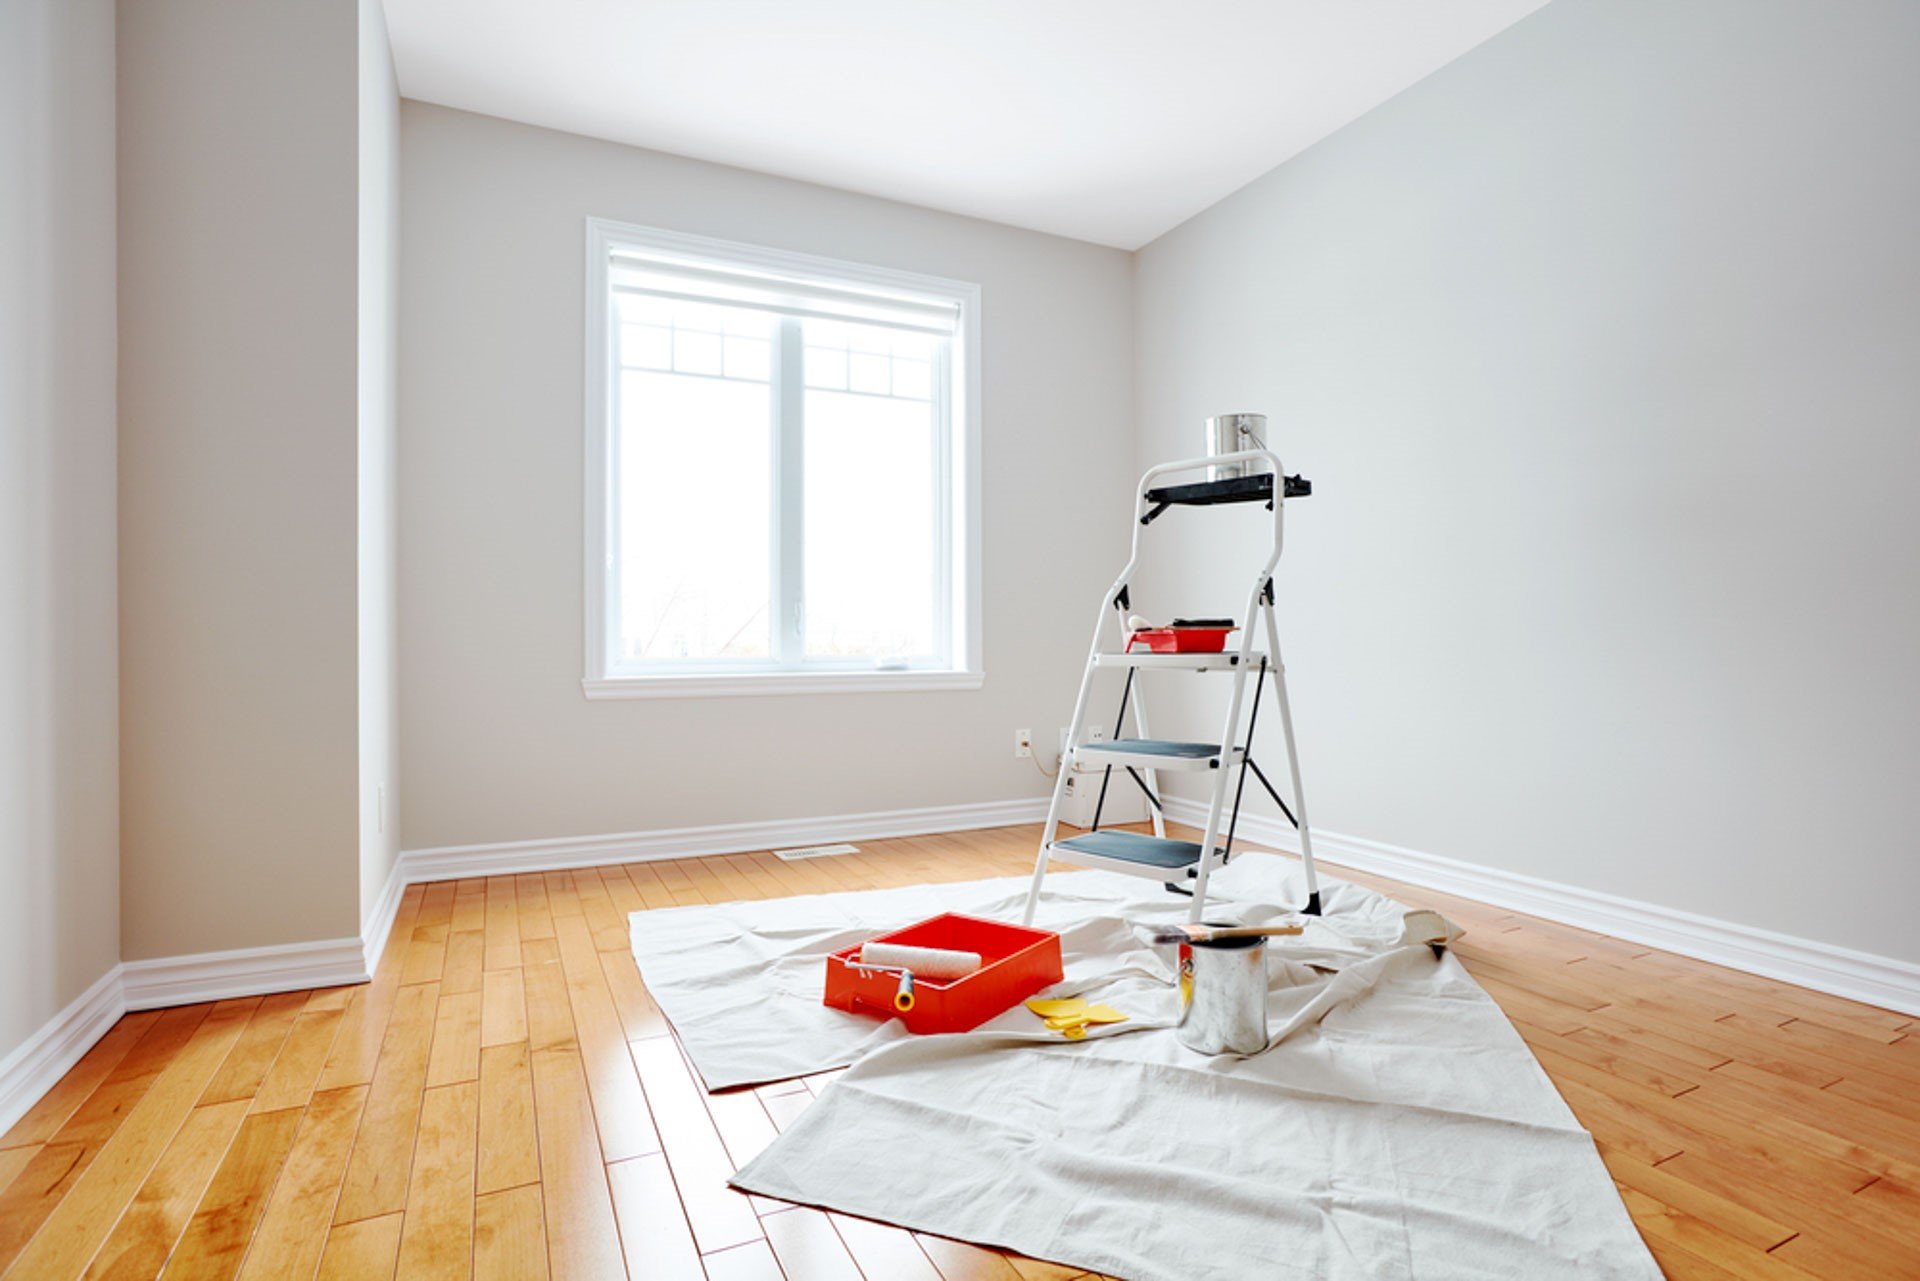 DRYWALL ESTIMATING SERVICES